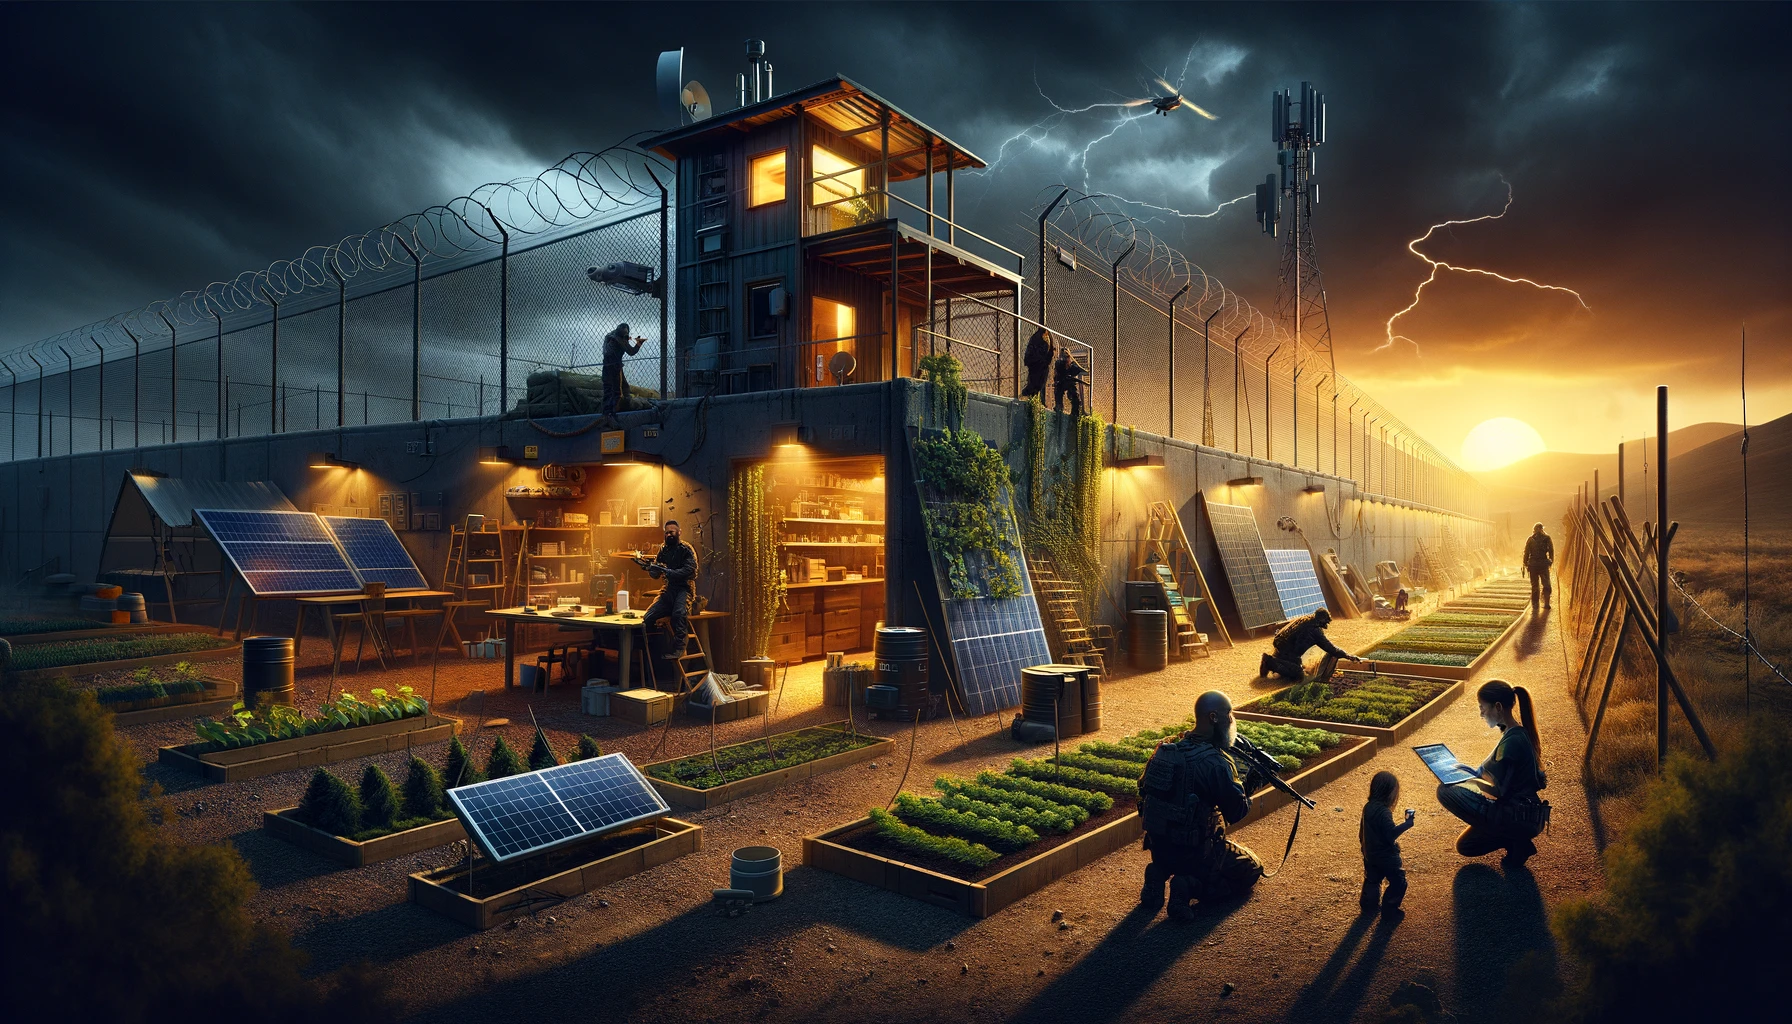 A family strengthens their fortified compound at dusk, focusing on sustainability and self-sufficiency with solar panels and a permaculture garden, symbolizing unity and preparedness for any scenario